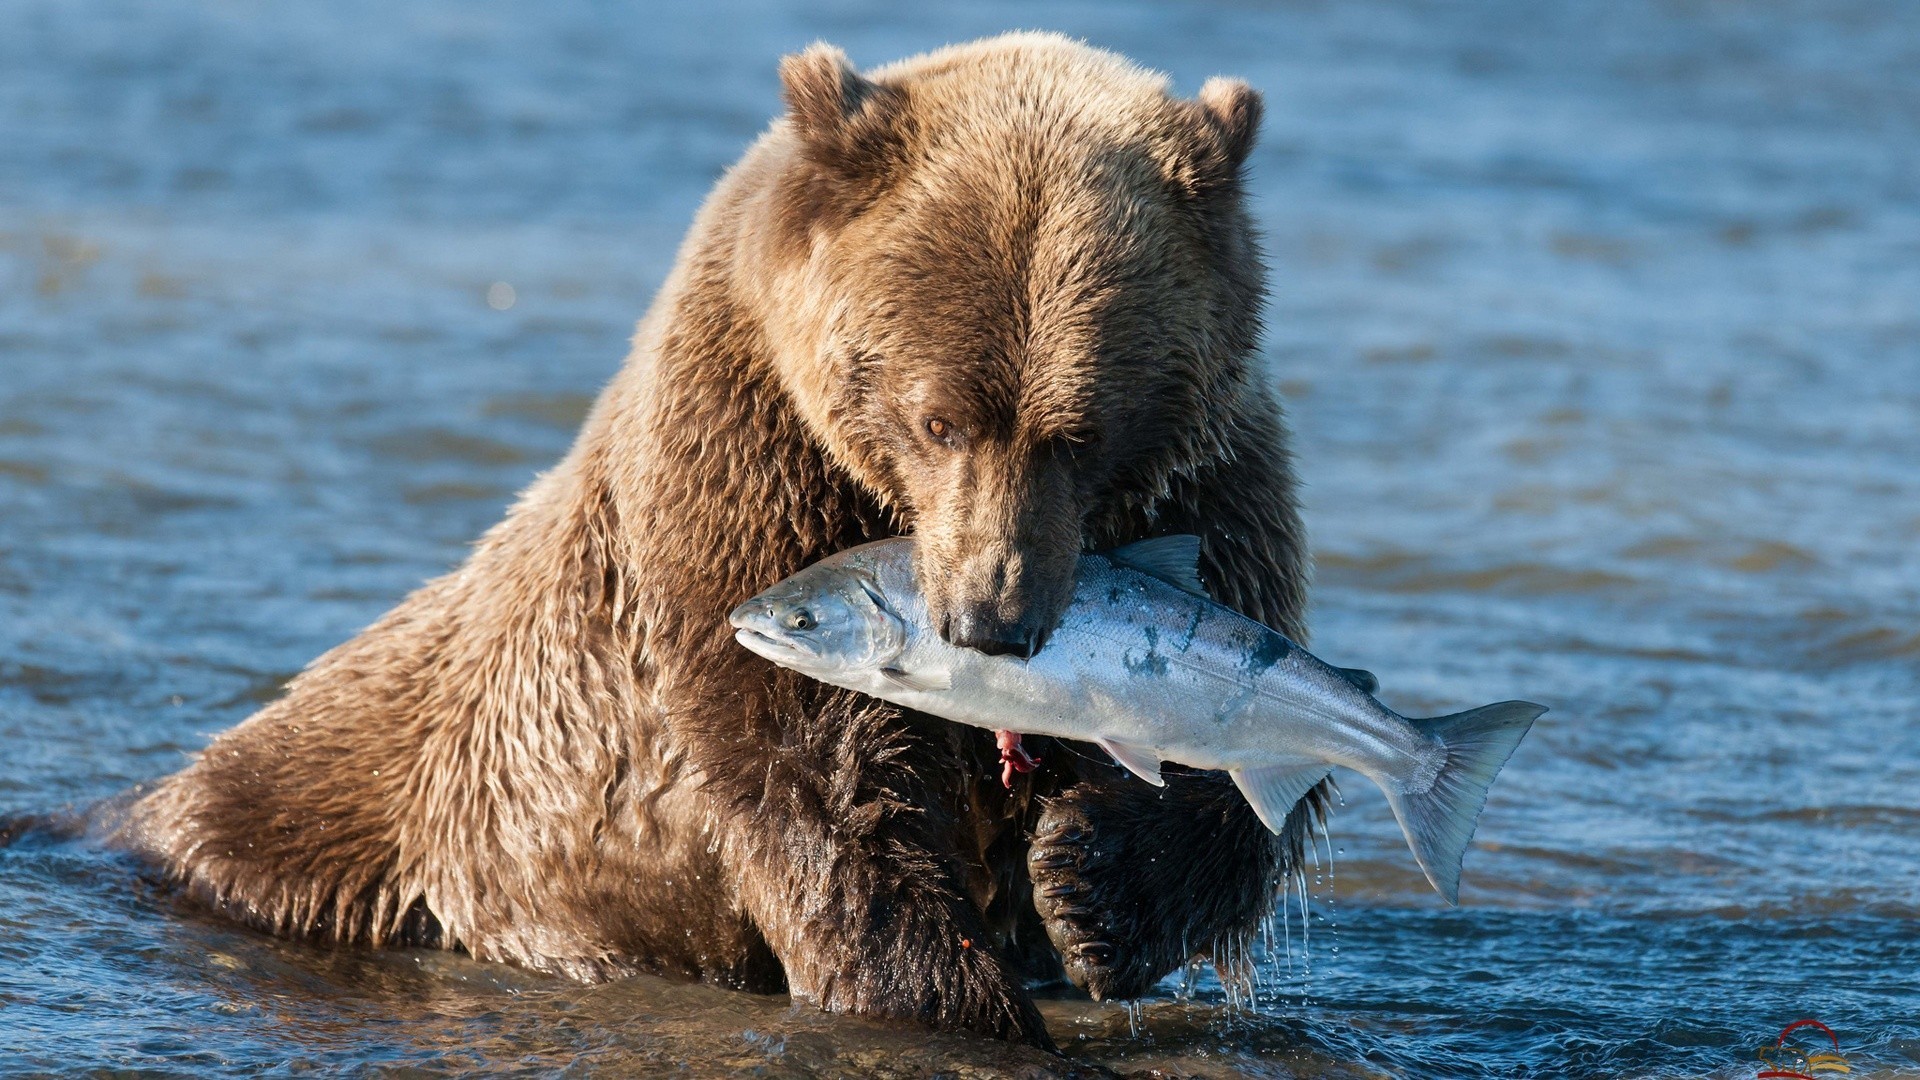 1920x1080 Bears - Bear Grizzly Fish Baby Polar Desktop Background for HD 16:9 High  Definition